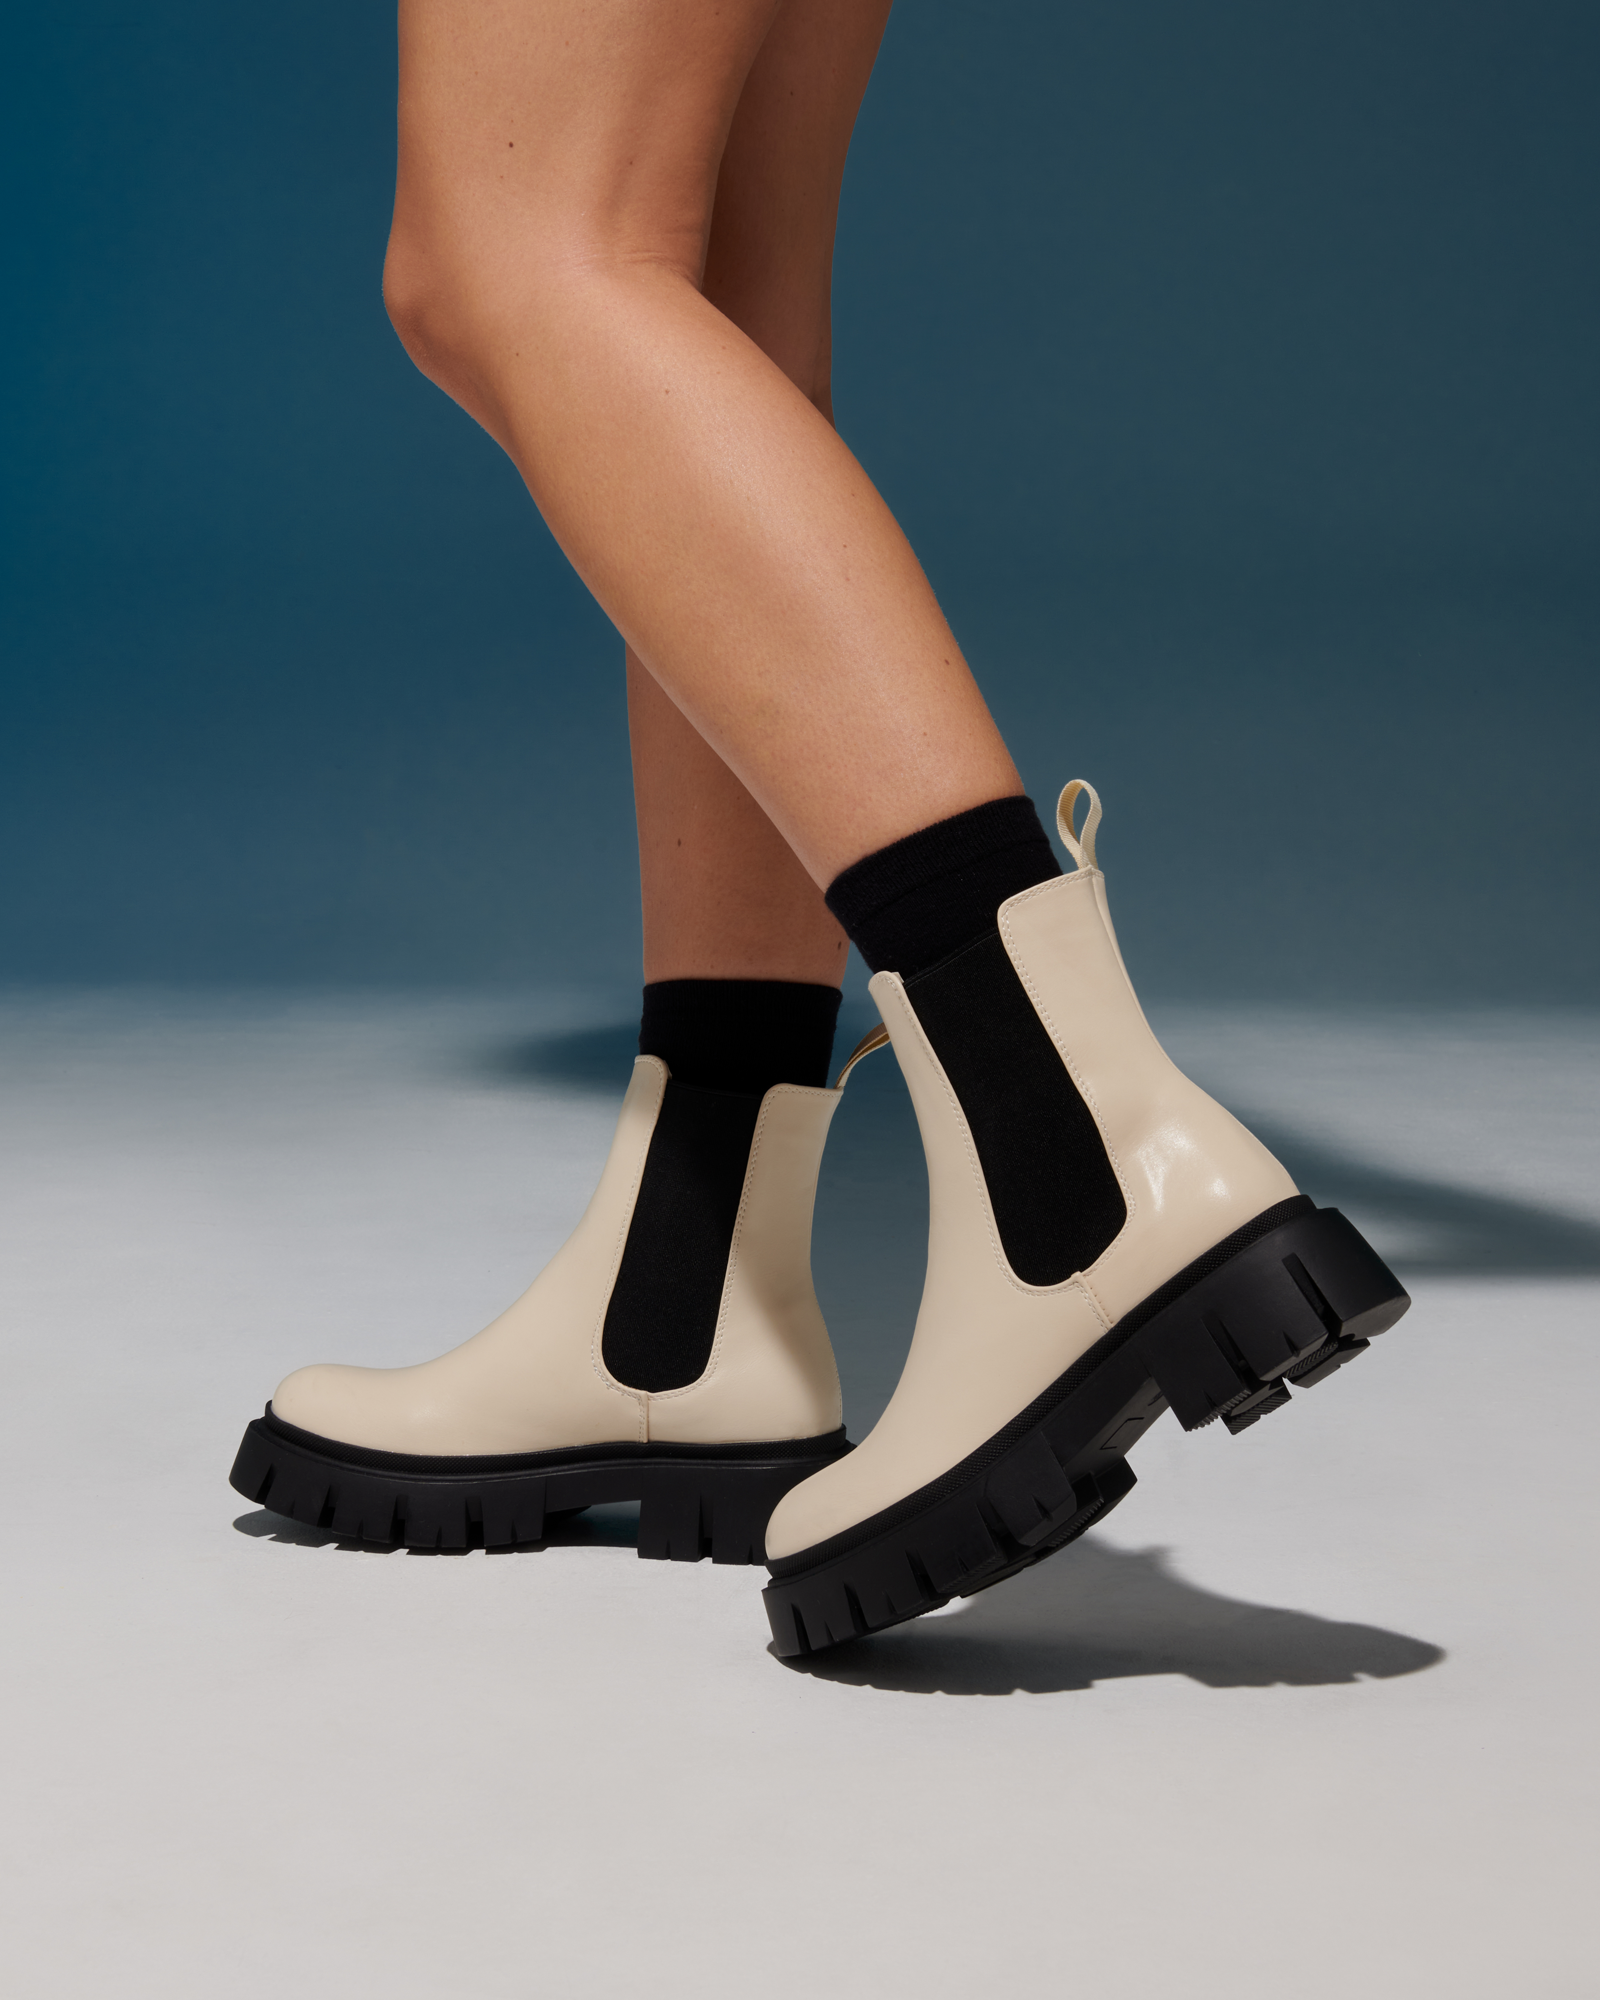 Therapy Shoes Idol Bone/Black | Women's Boots | Ankle | Chunky | 90's | Gusset